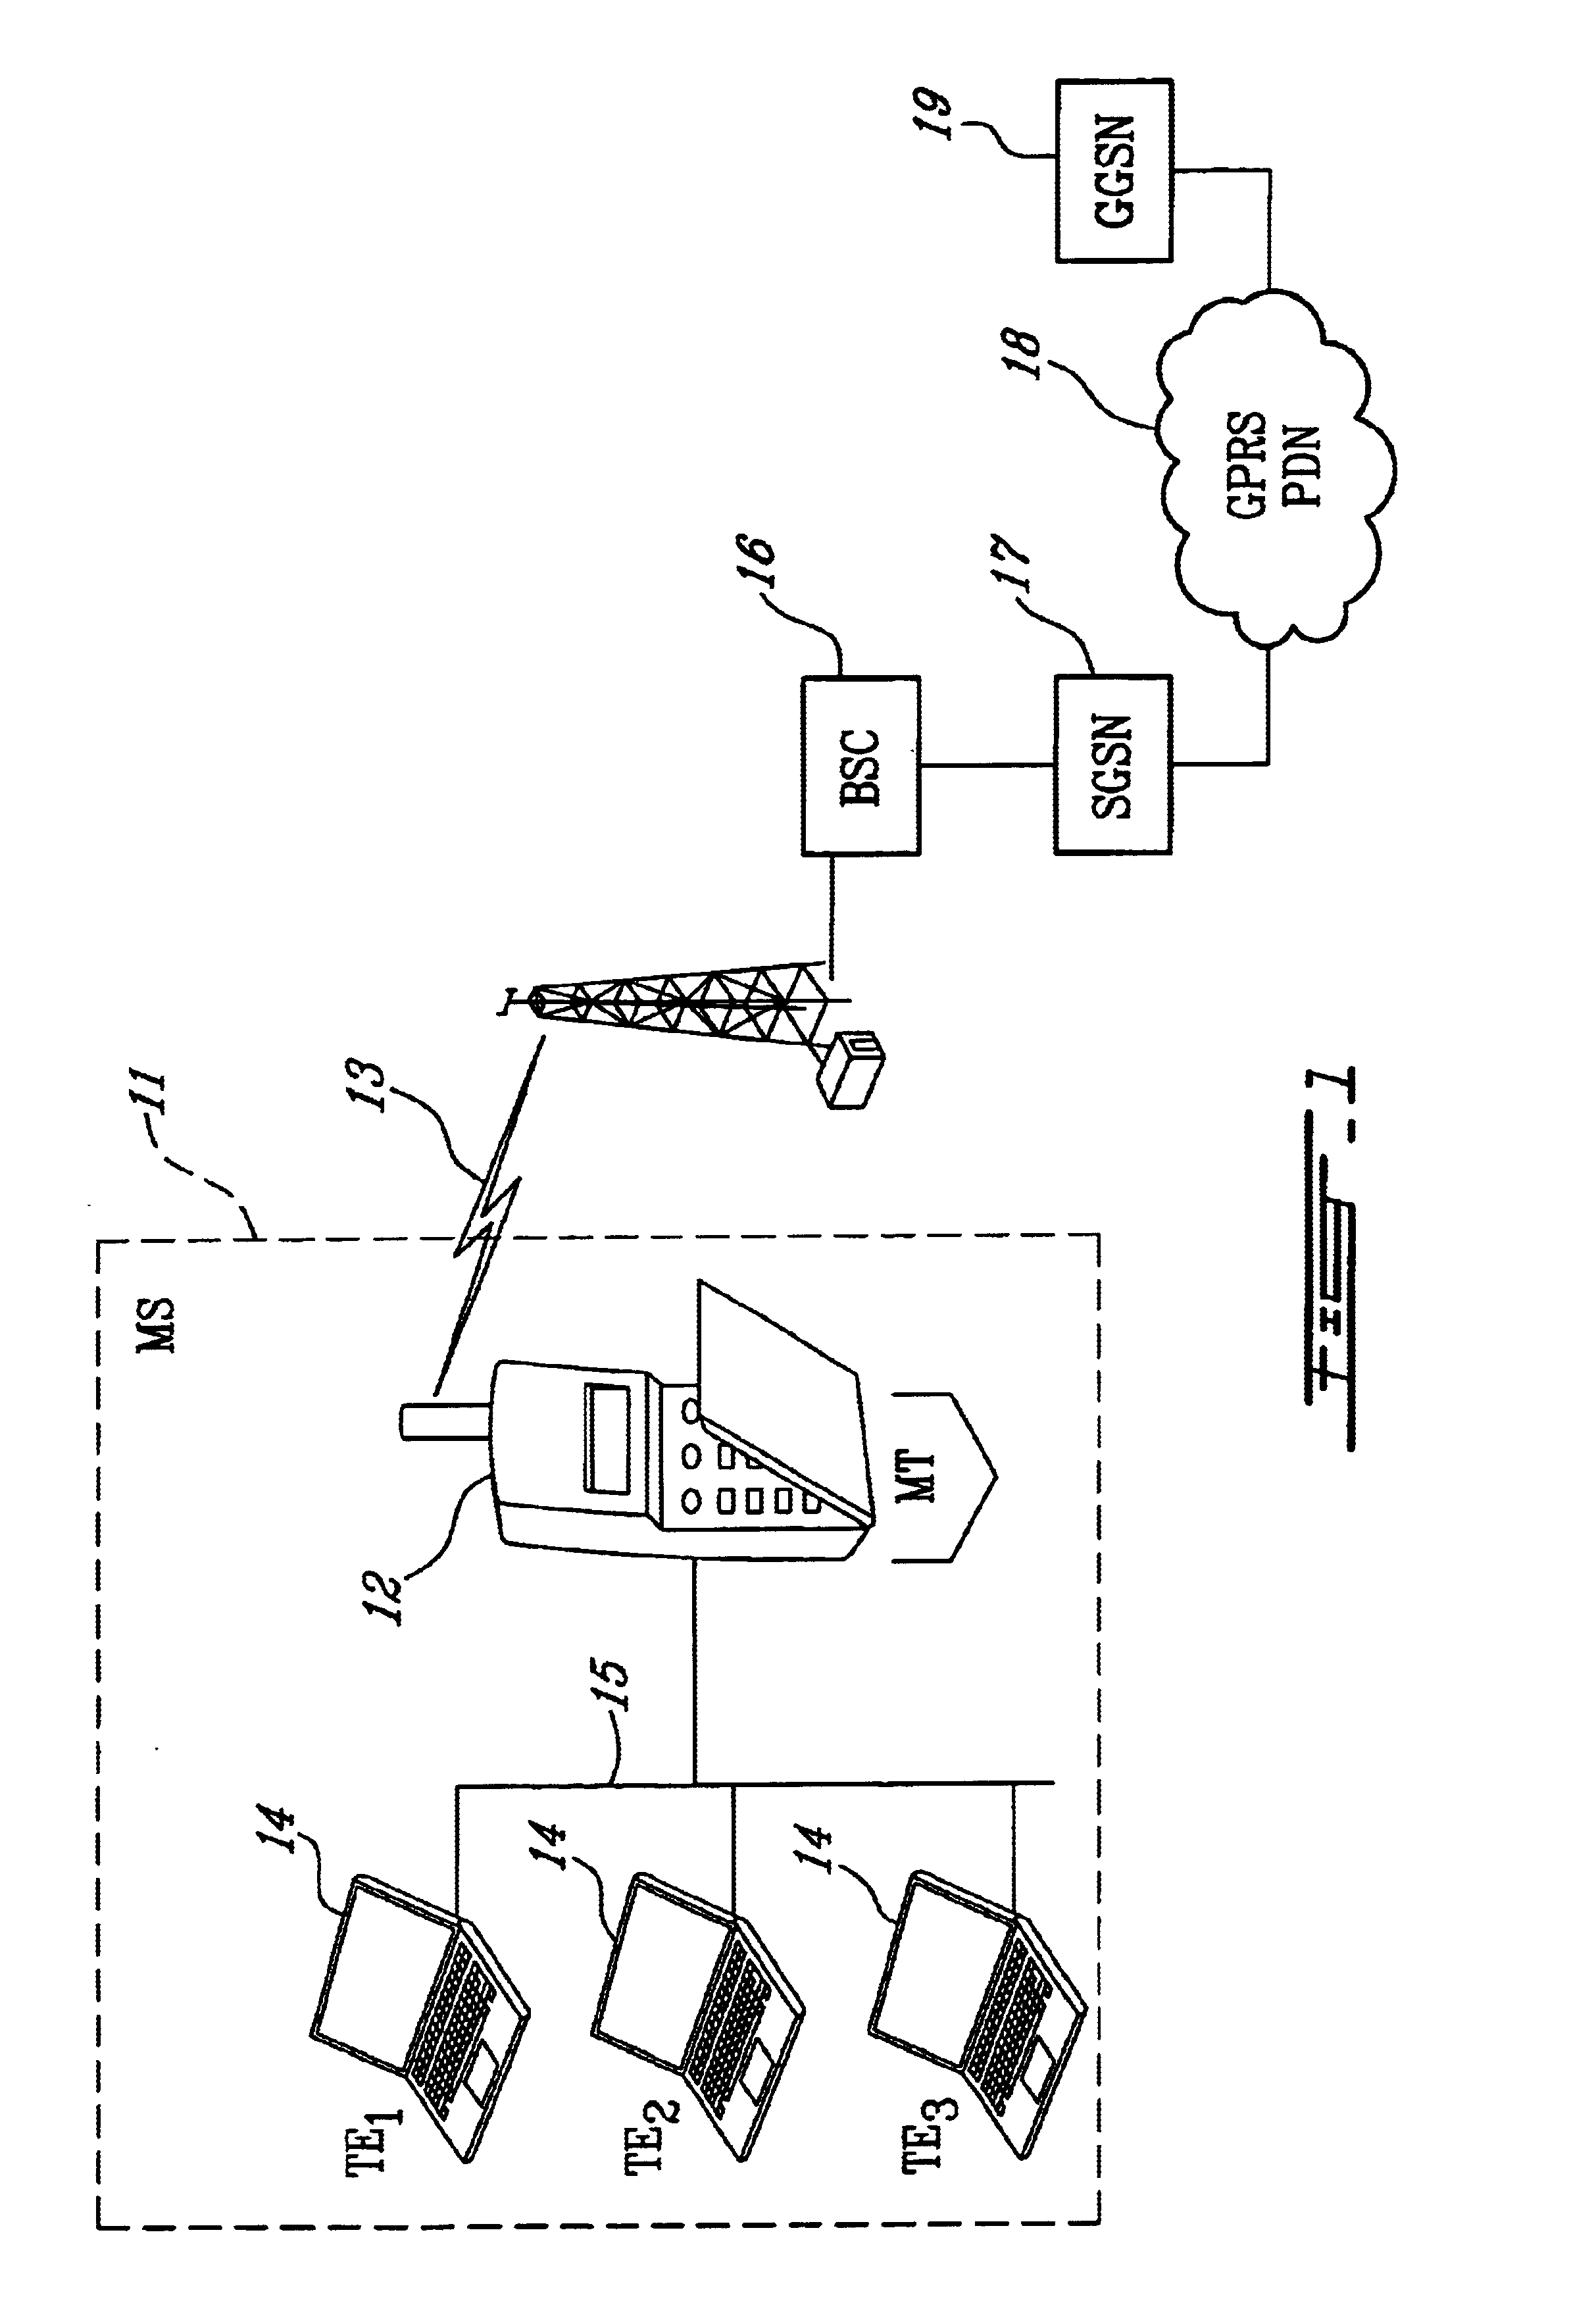 Mobile terminal and method of providing a network-to-network connection